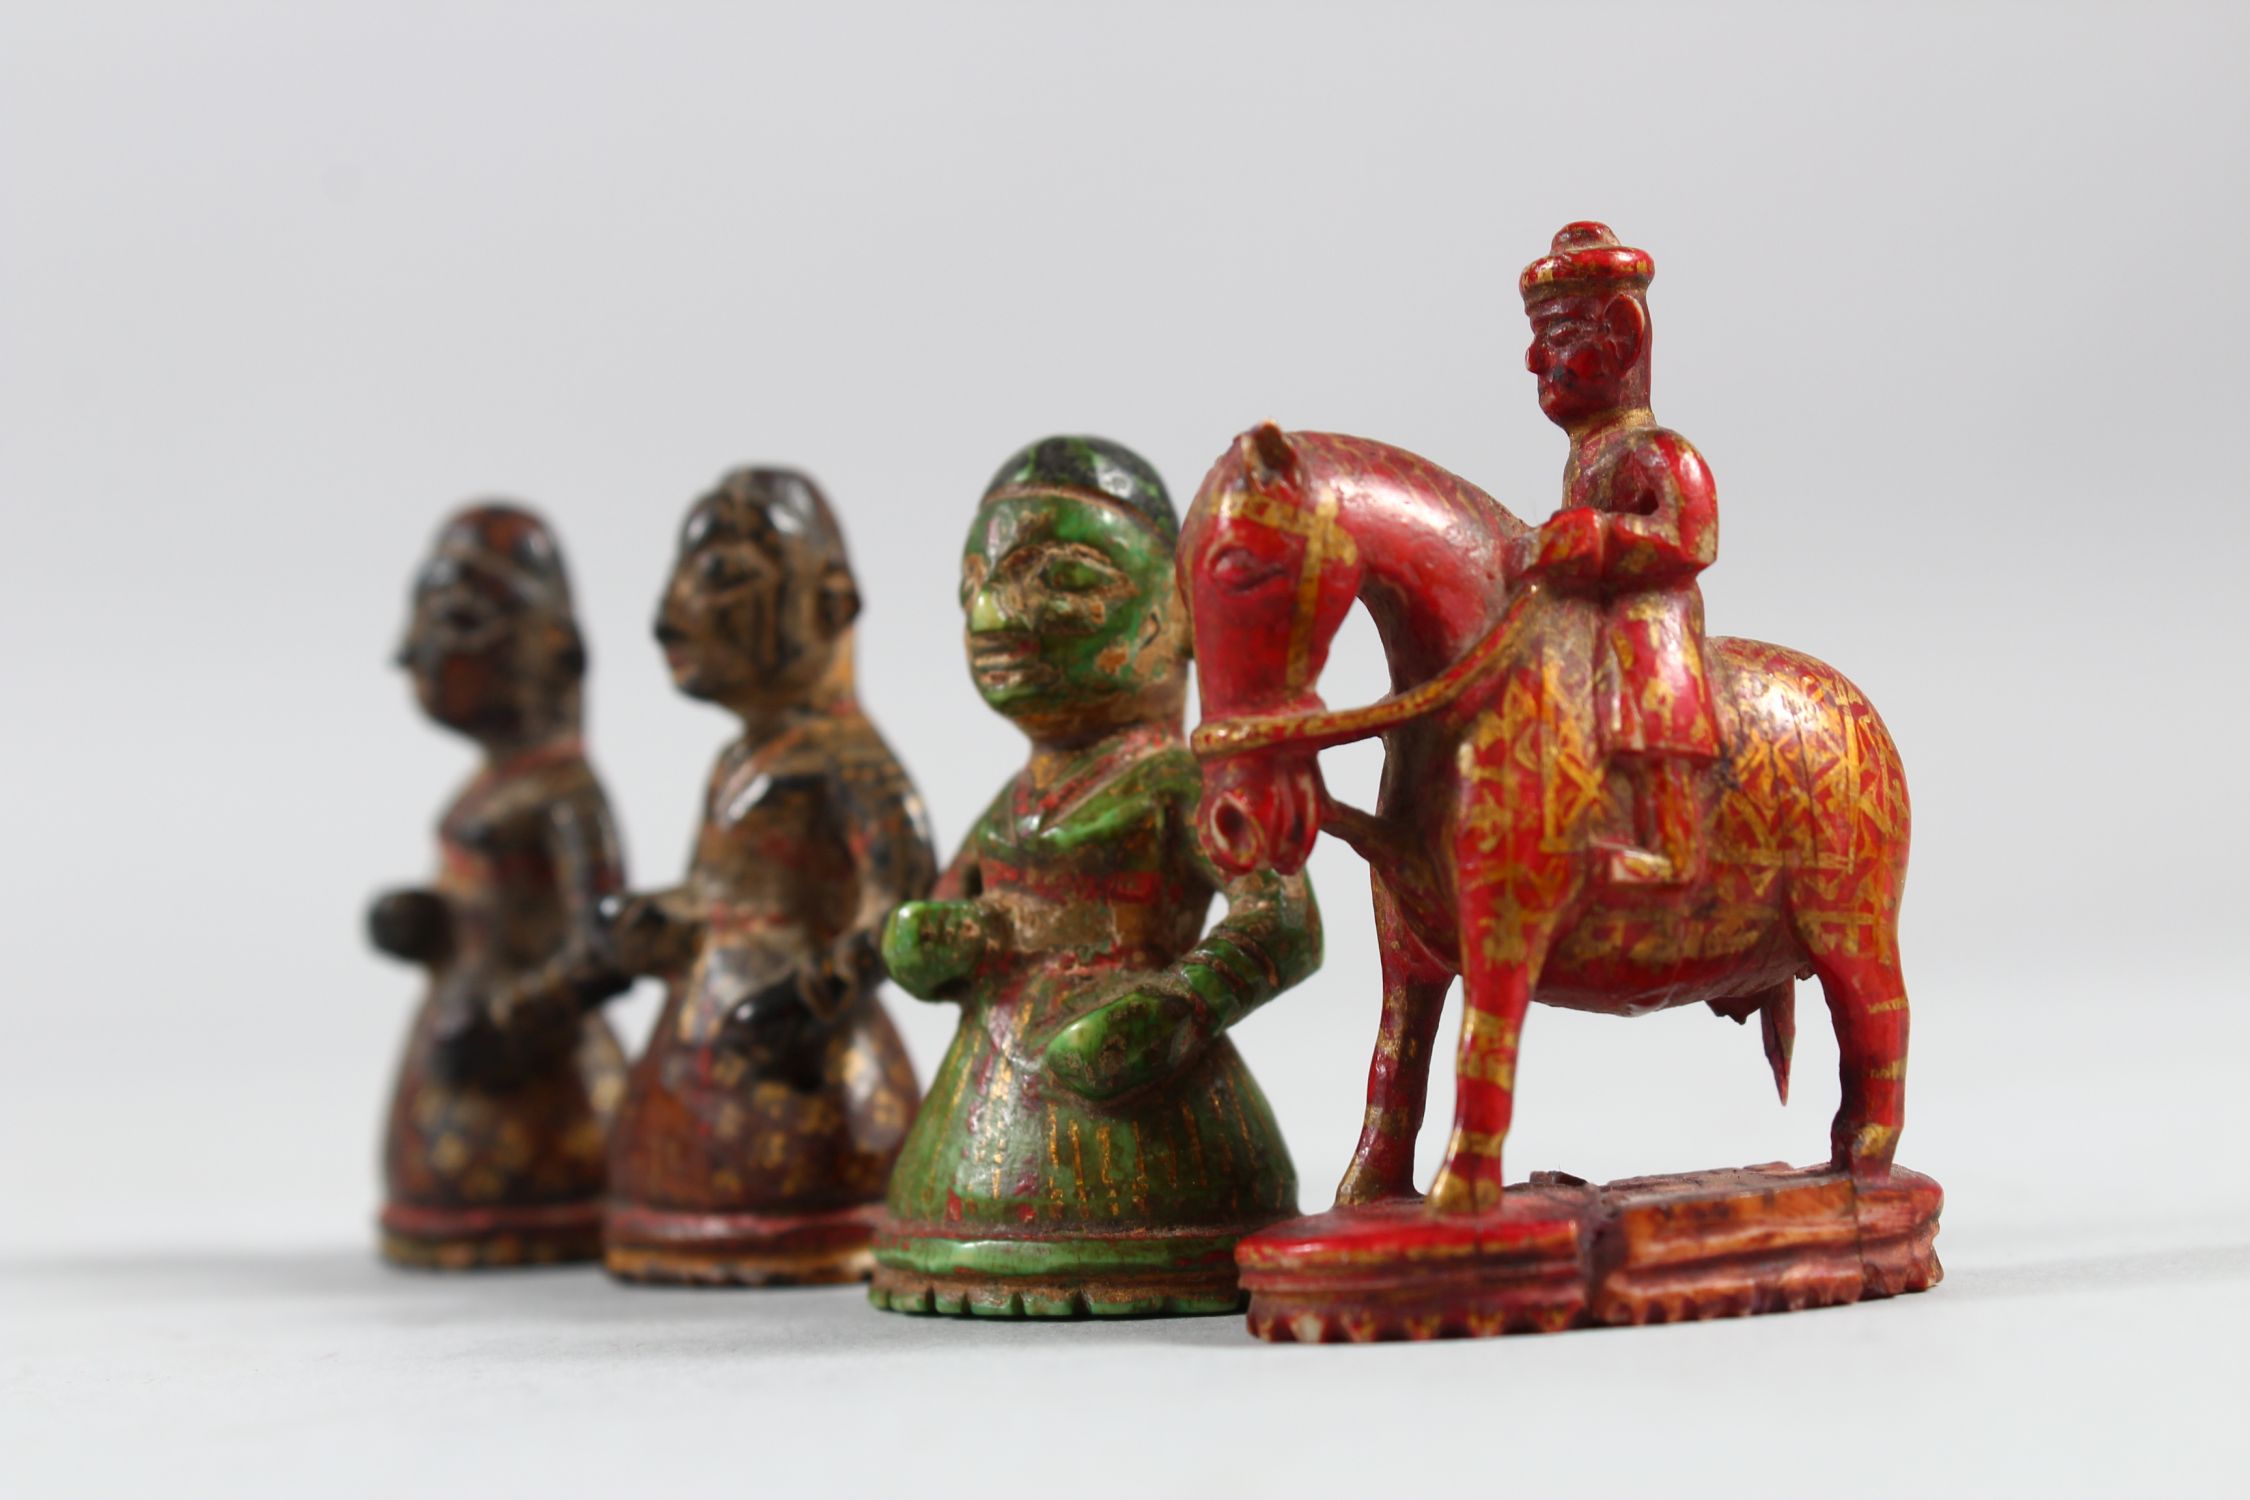 A COLLECTION OF FOUR 17TH CENTURY INDIAN POYCHROME IVORY CHESS PIECES, 5cm high. - Image 4 of 4